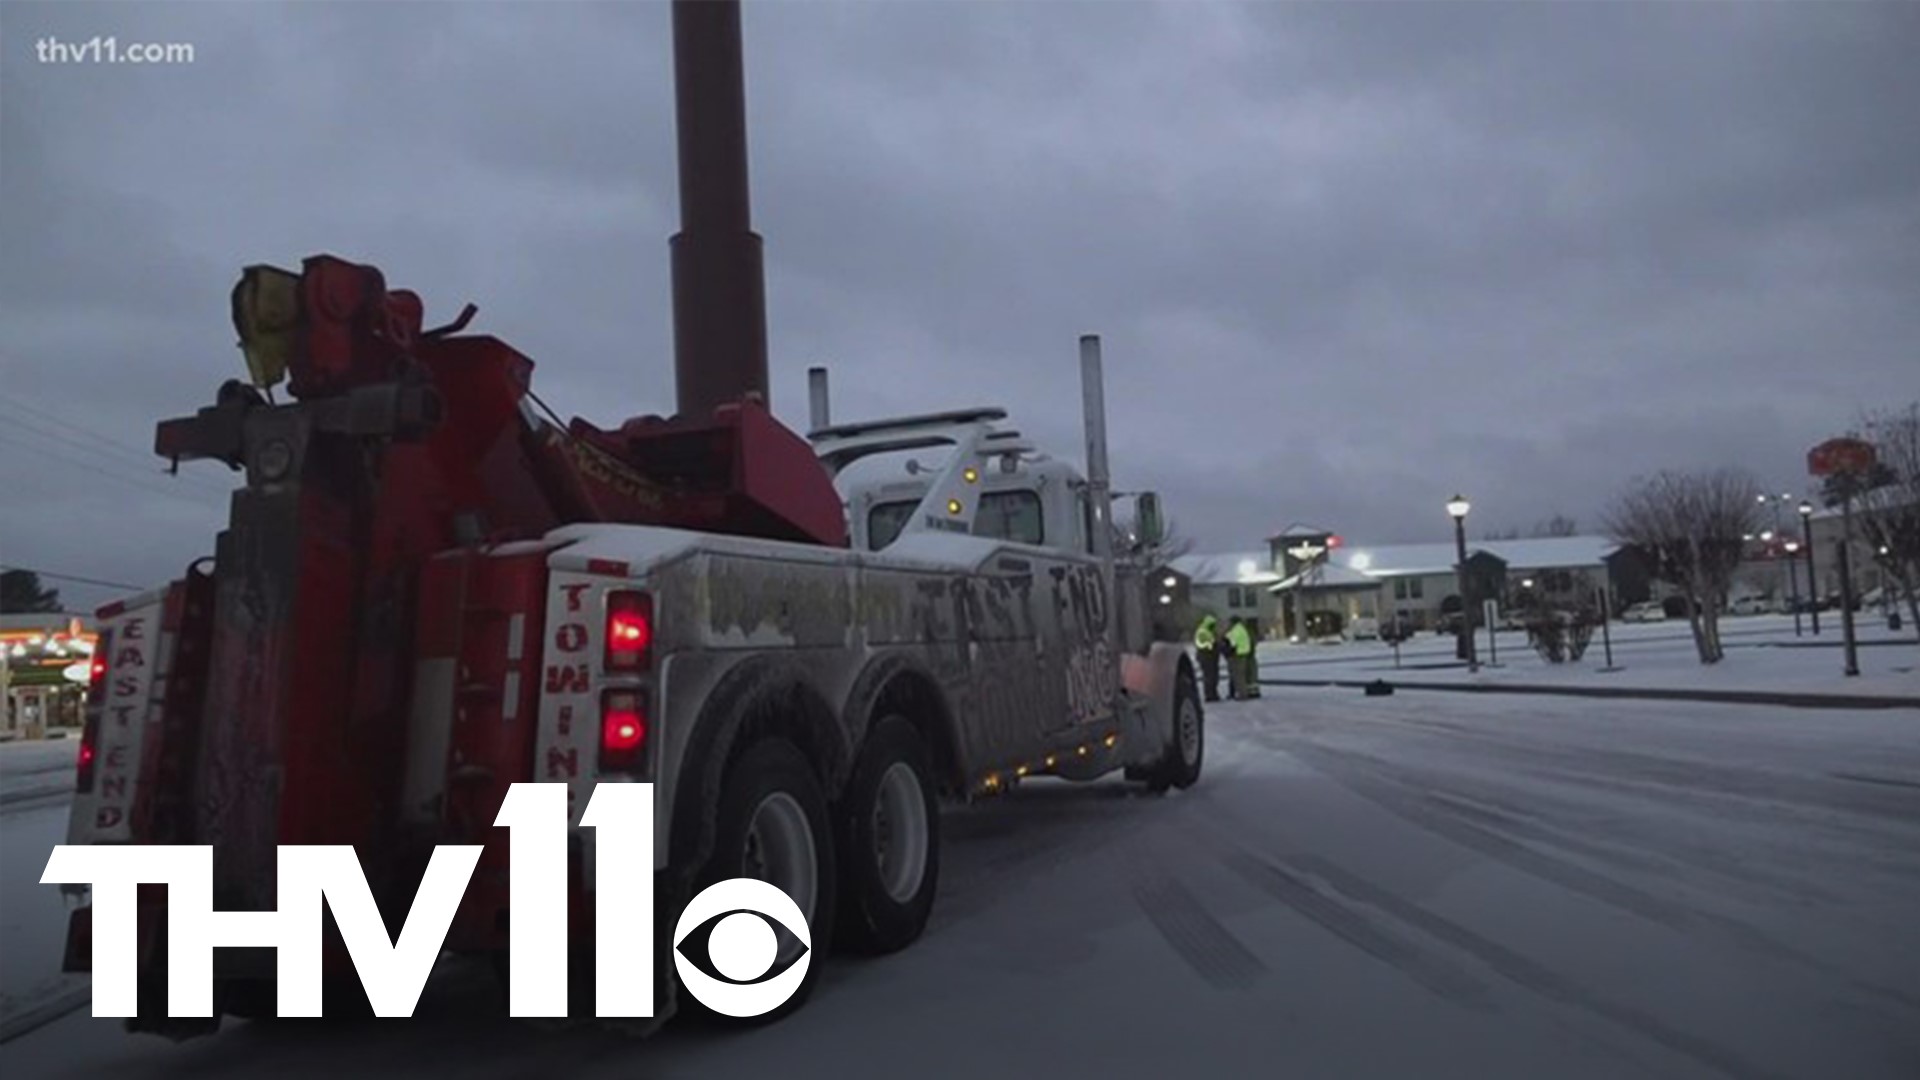 Throughout the day, tow truck drivers rescued a lot of people... but they expect a lot of calls overnight.